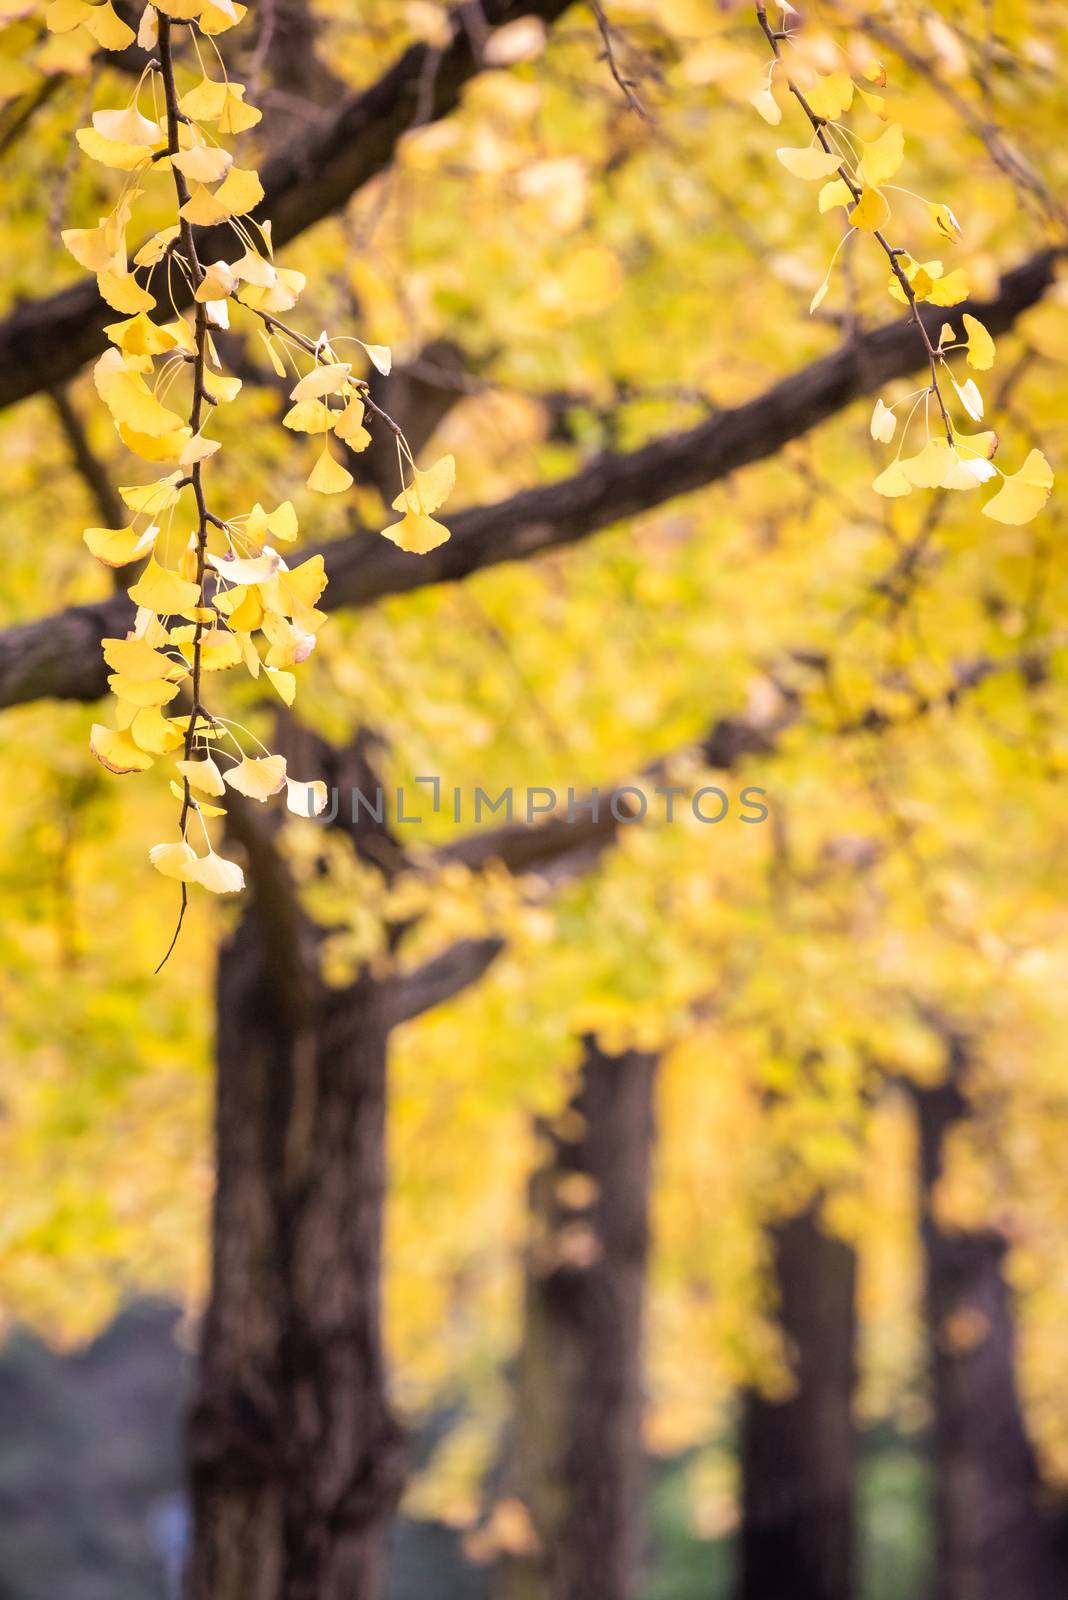 Gingko trees alignment with yellow leaves in autumn in Chengdu, Sichuan province, China